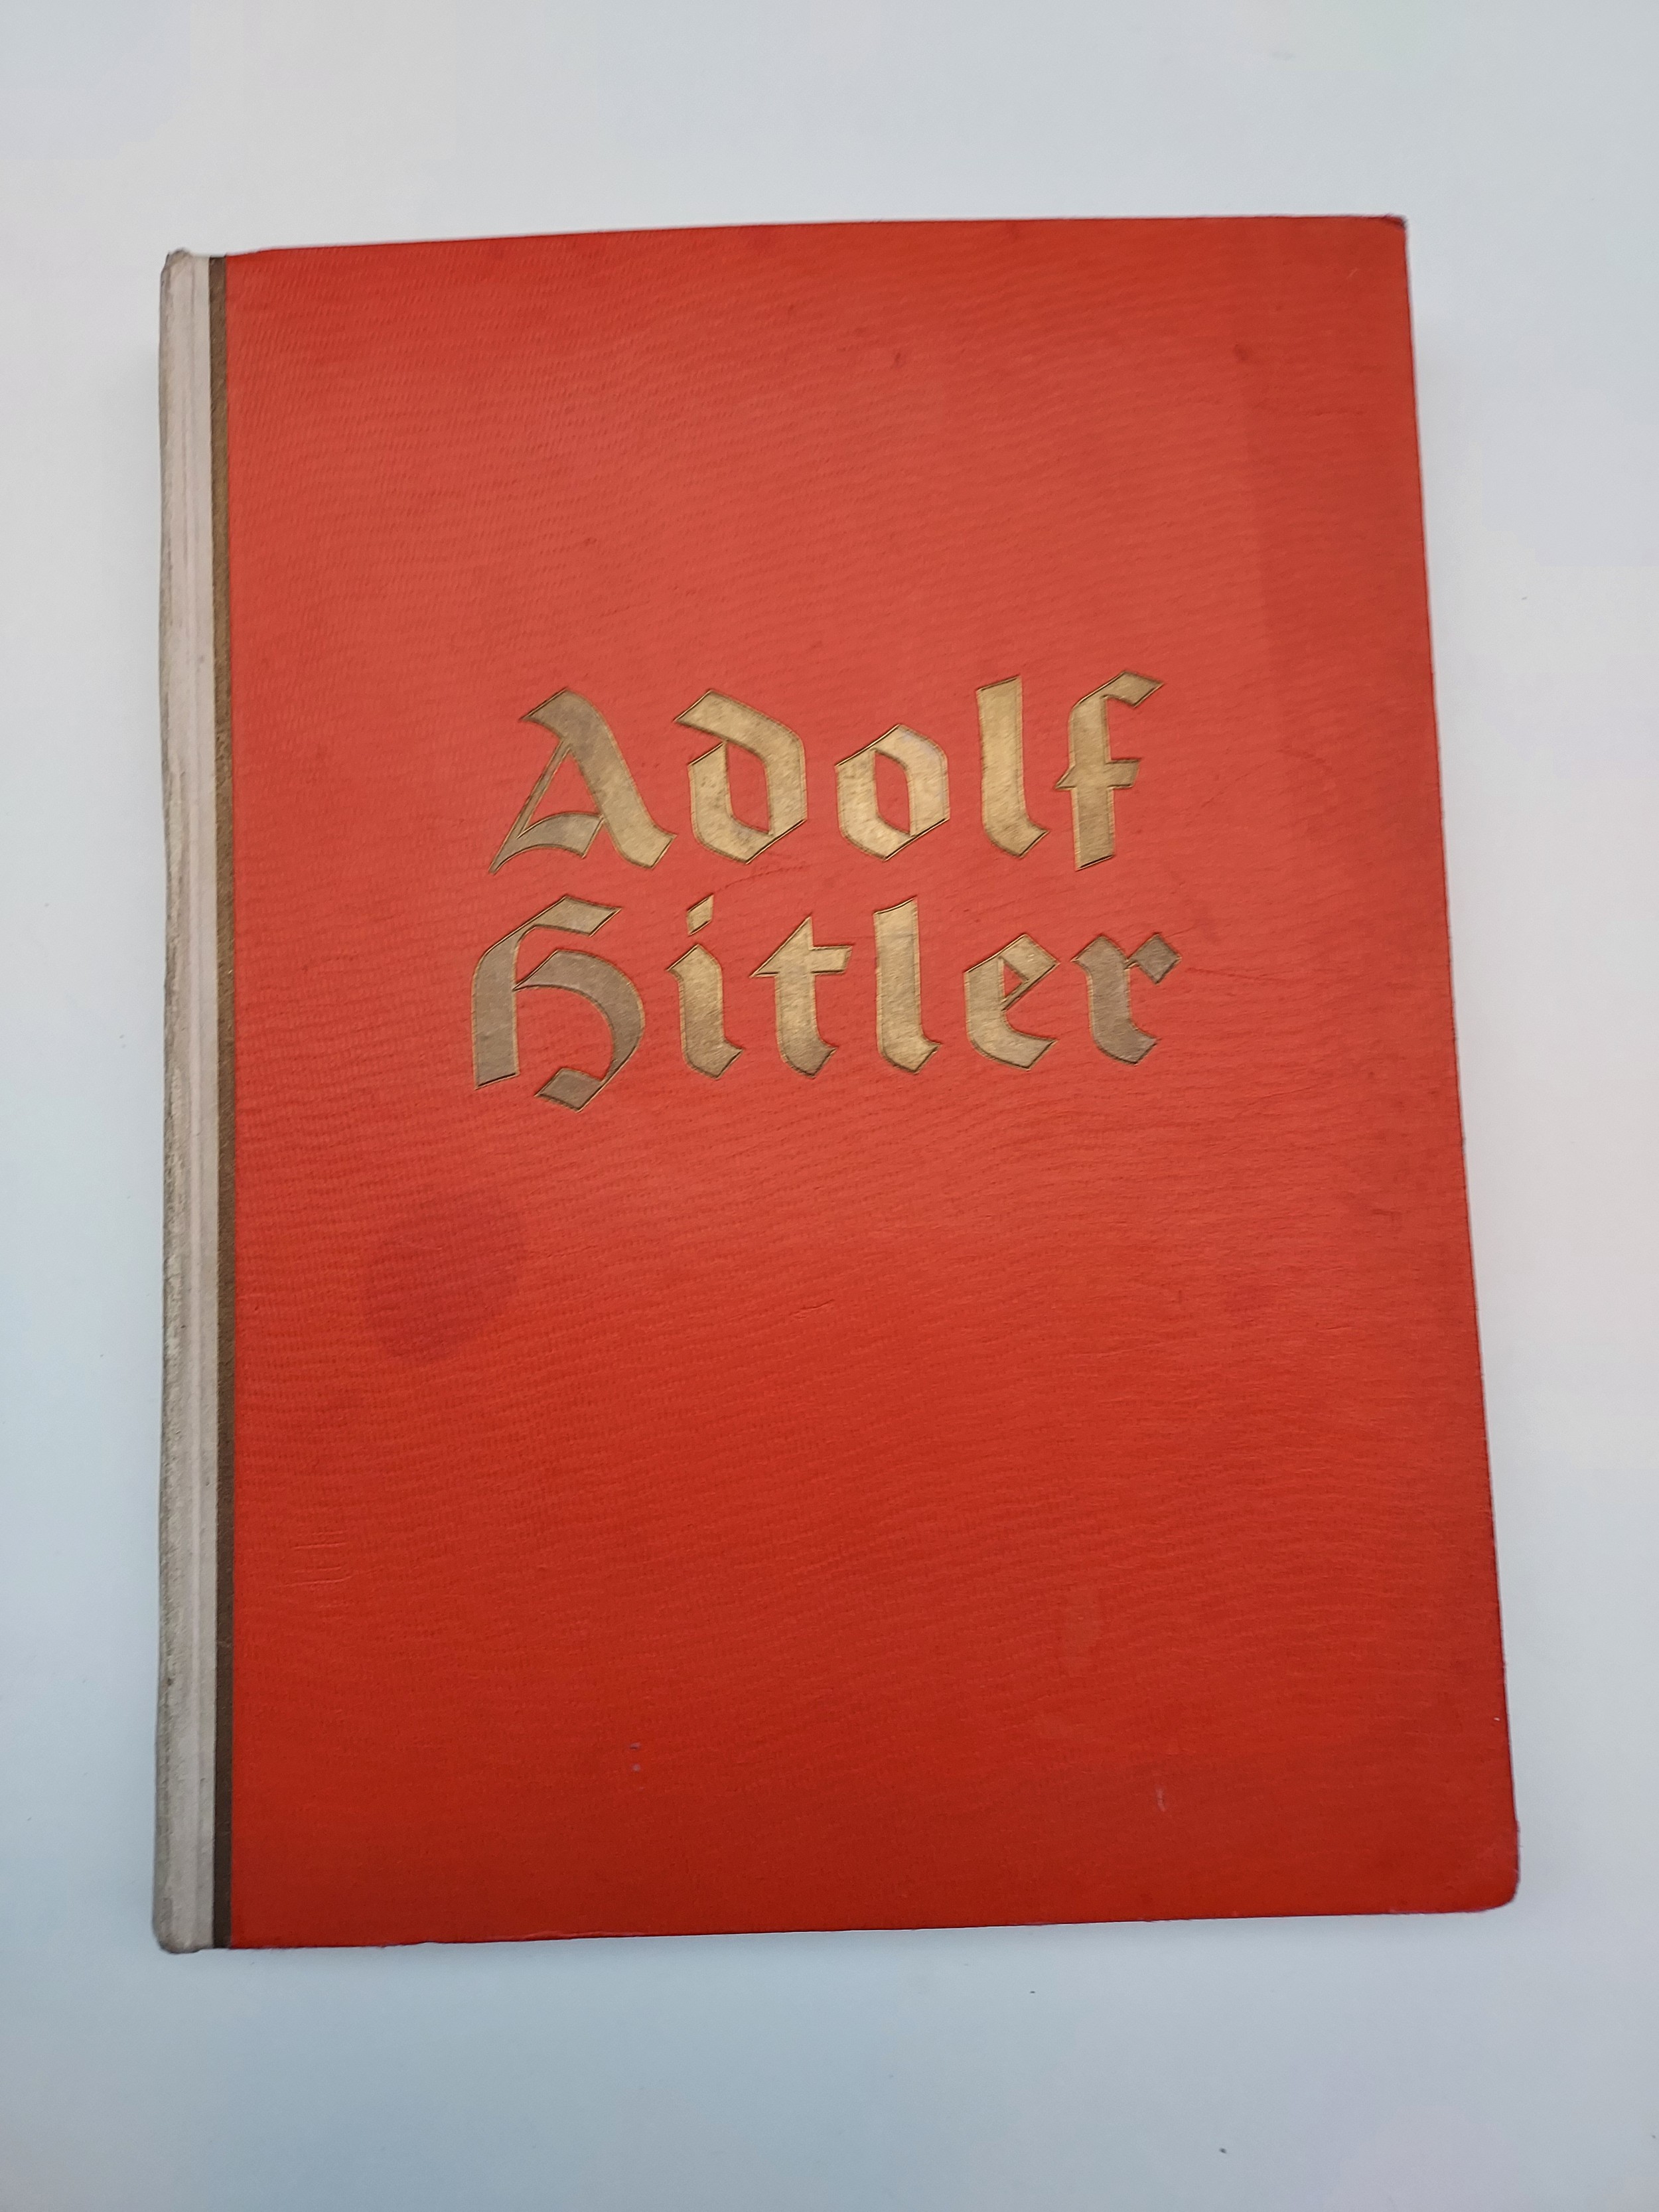 A Scarce Volume Entitled Adolf Hitler 133 pages with over 200 tipped in photo plates (Black and